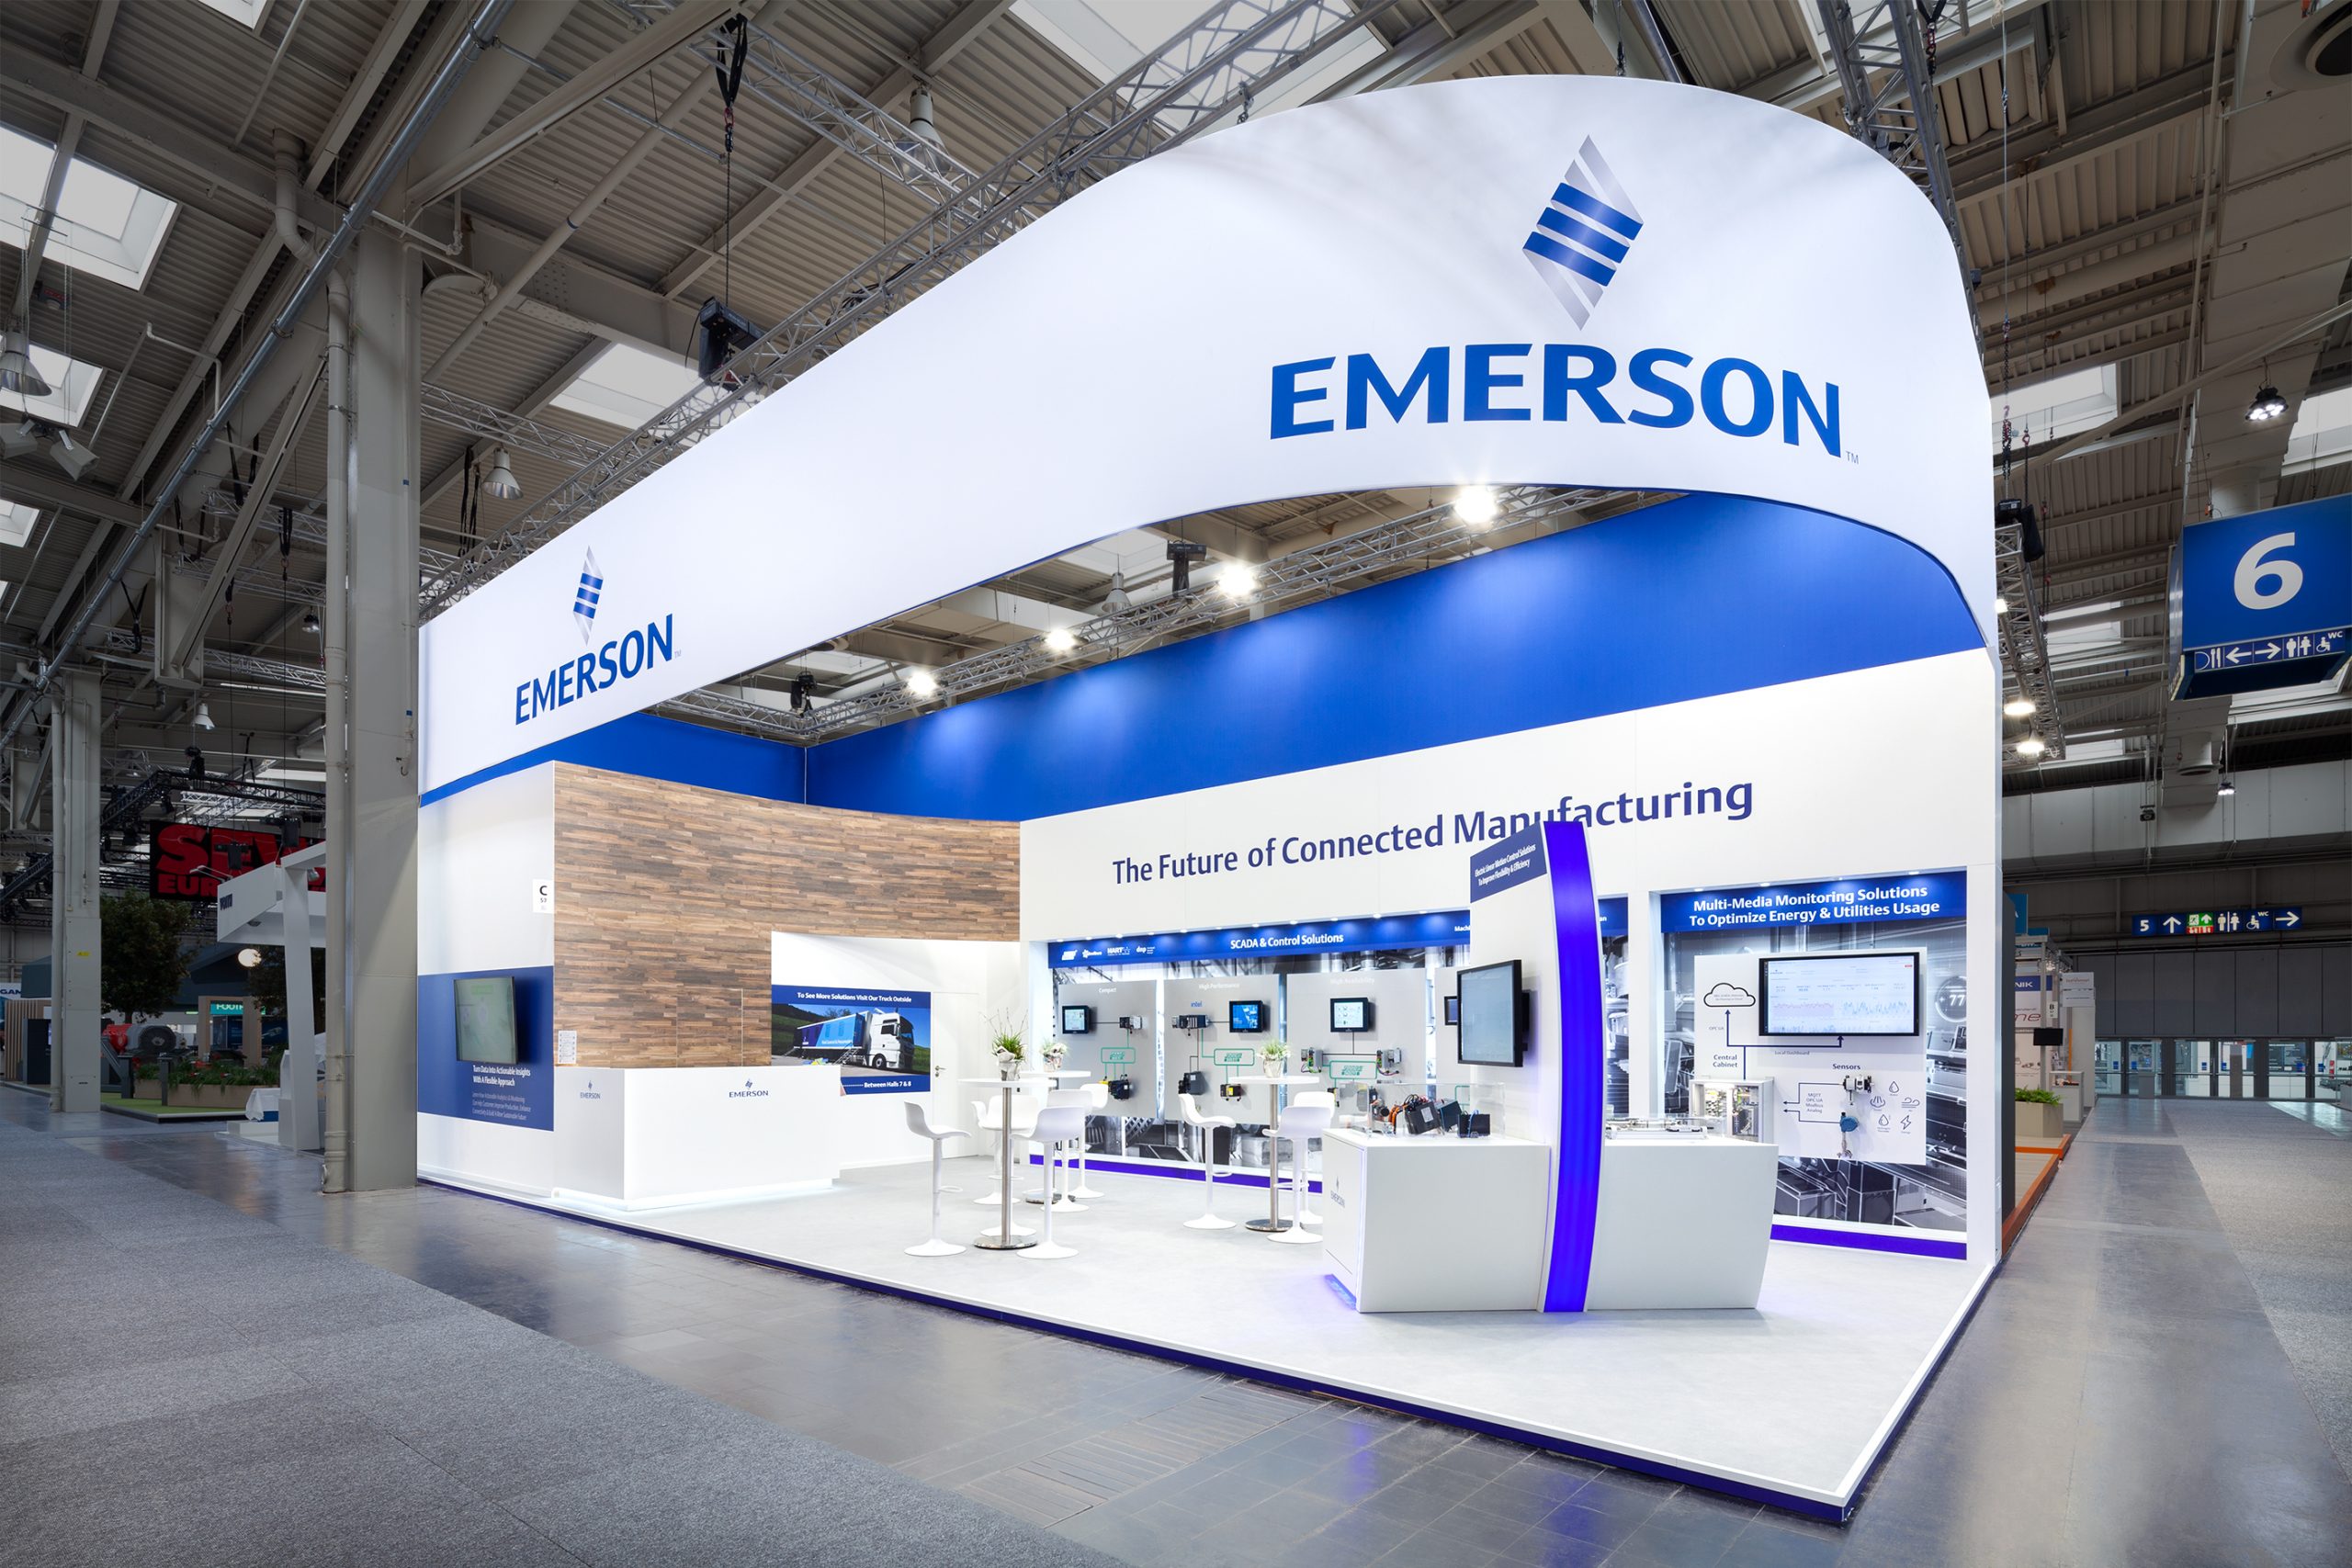 THE INSIDE - EMERSON - HMI 2022 - HANNOVER - STAND PHOTOGRAPHY - #7037 (Ir)